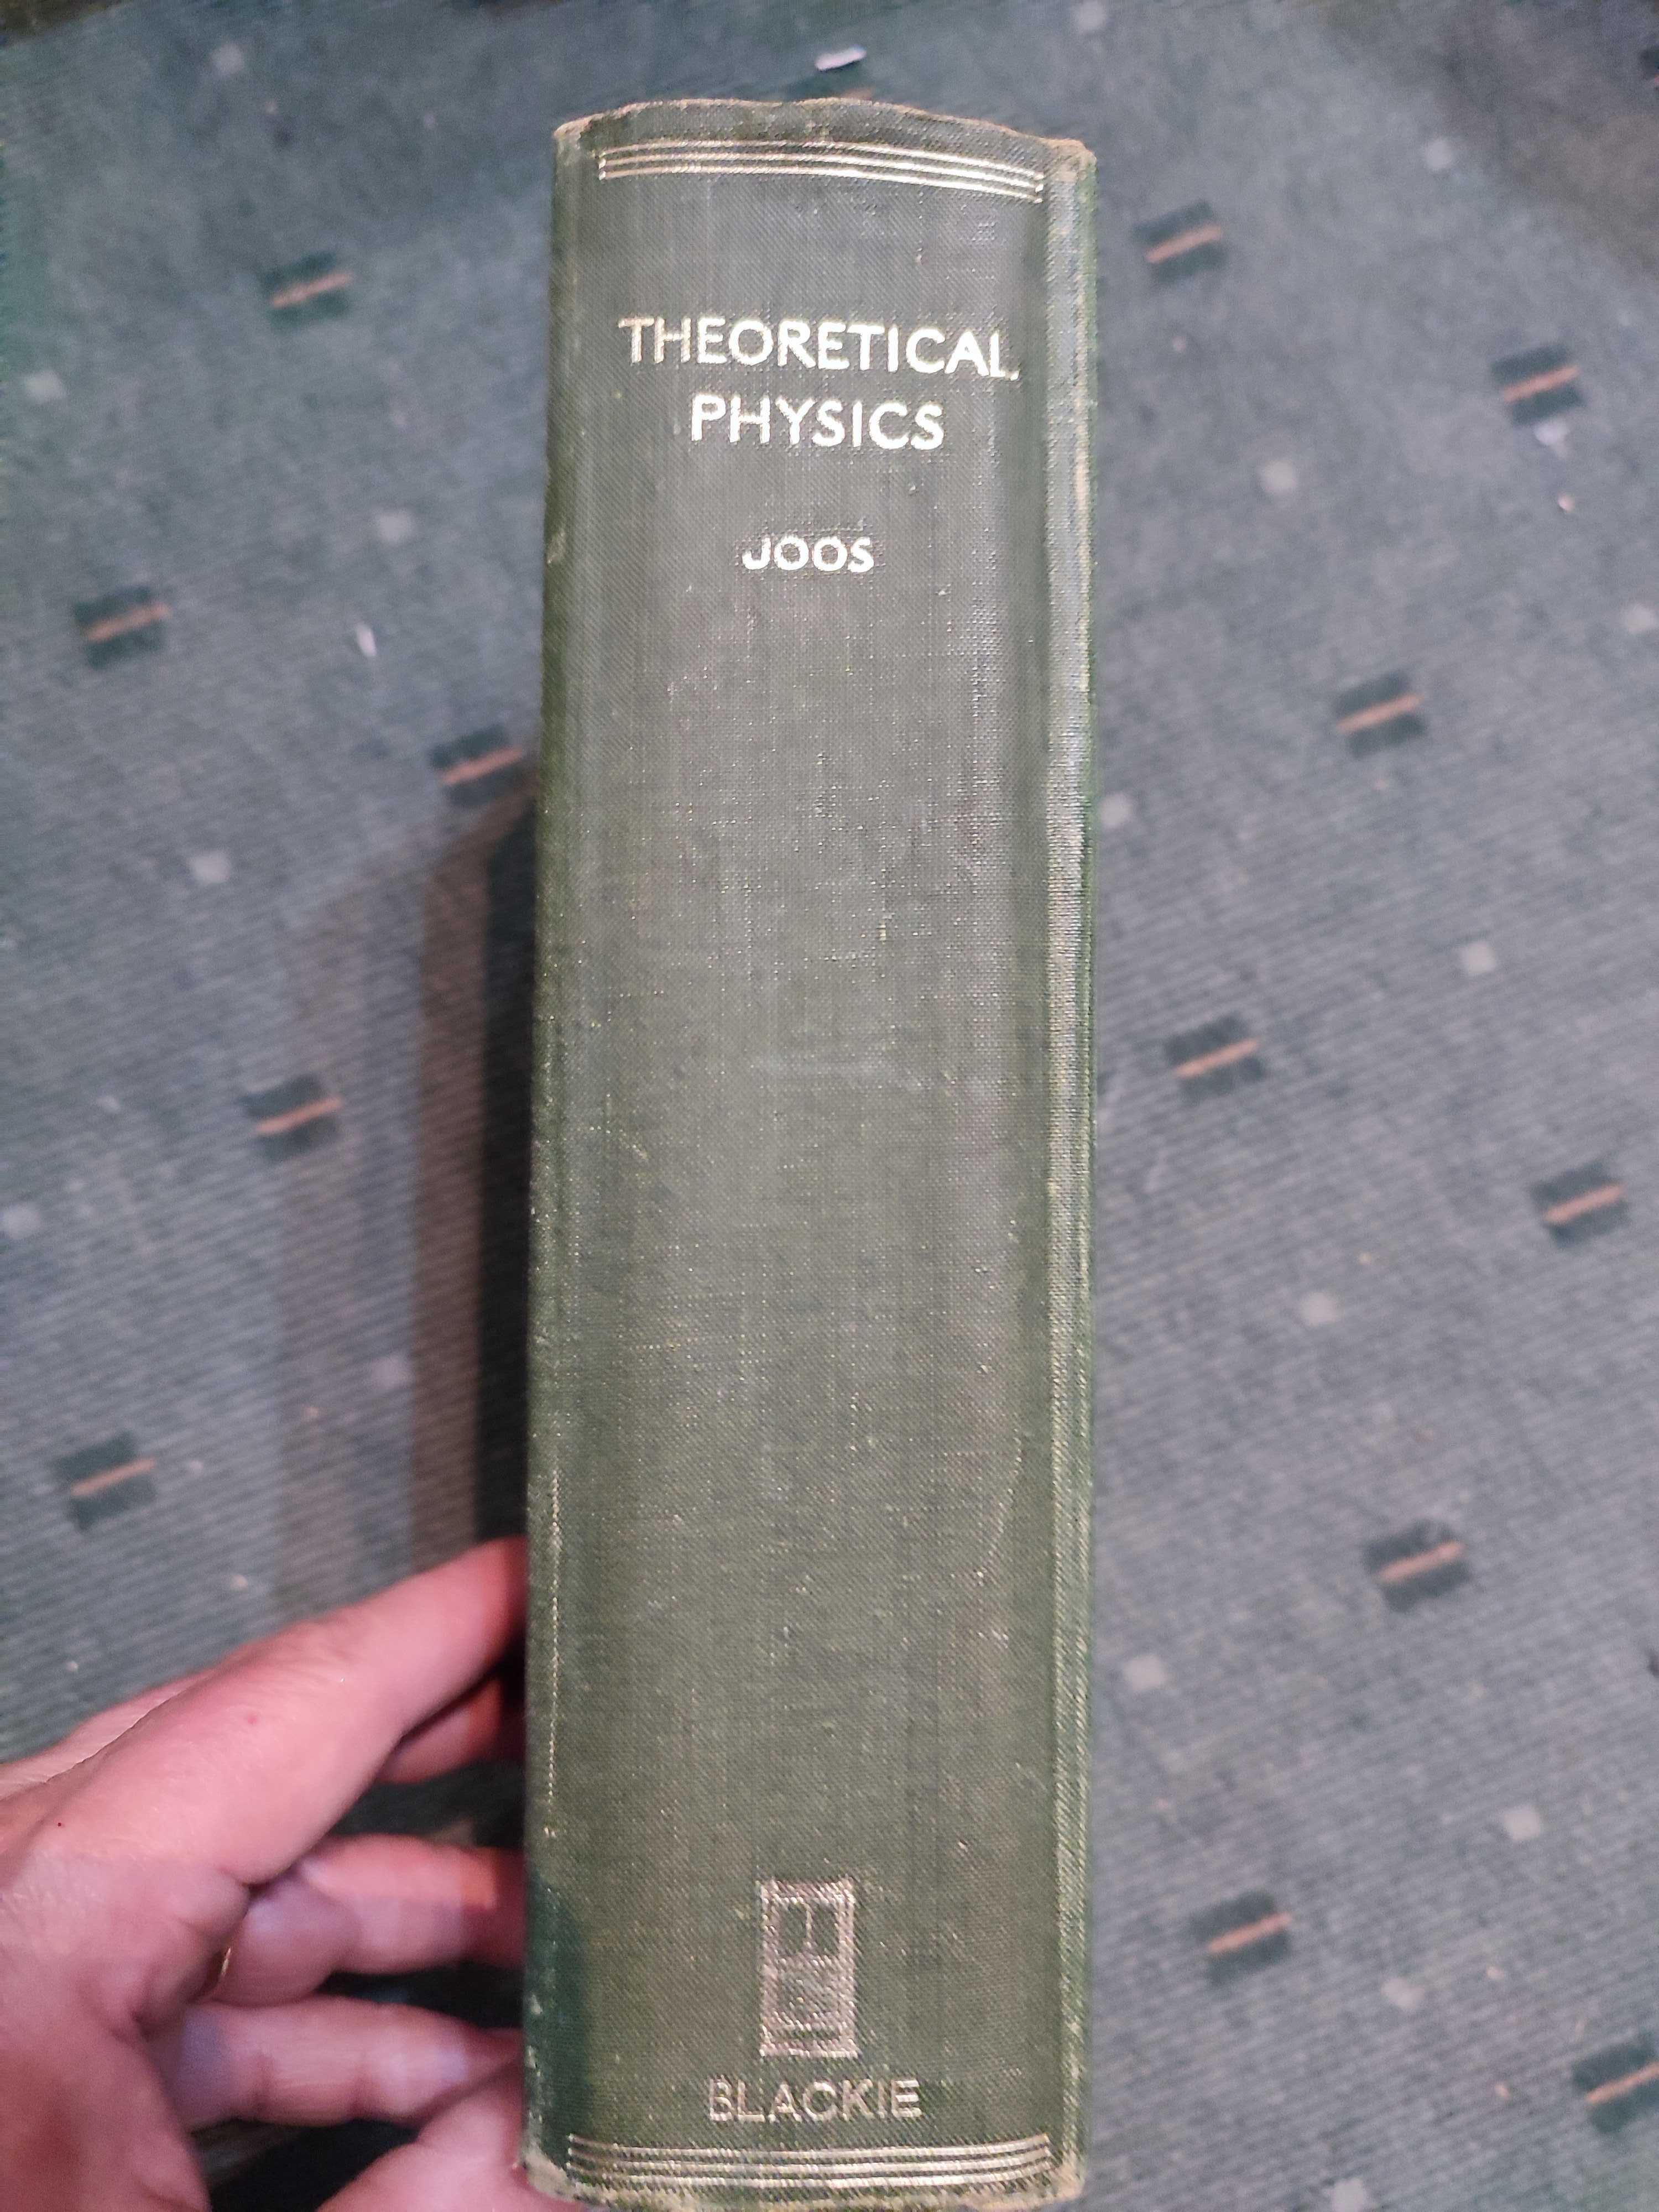 Theoretical Phisics by Georg Joos